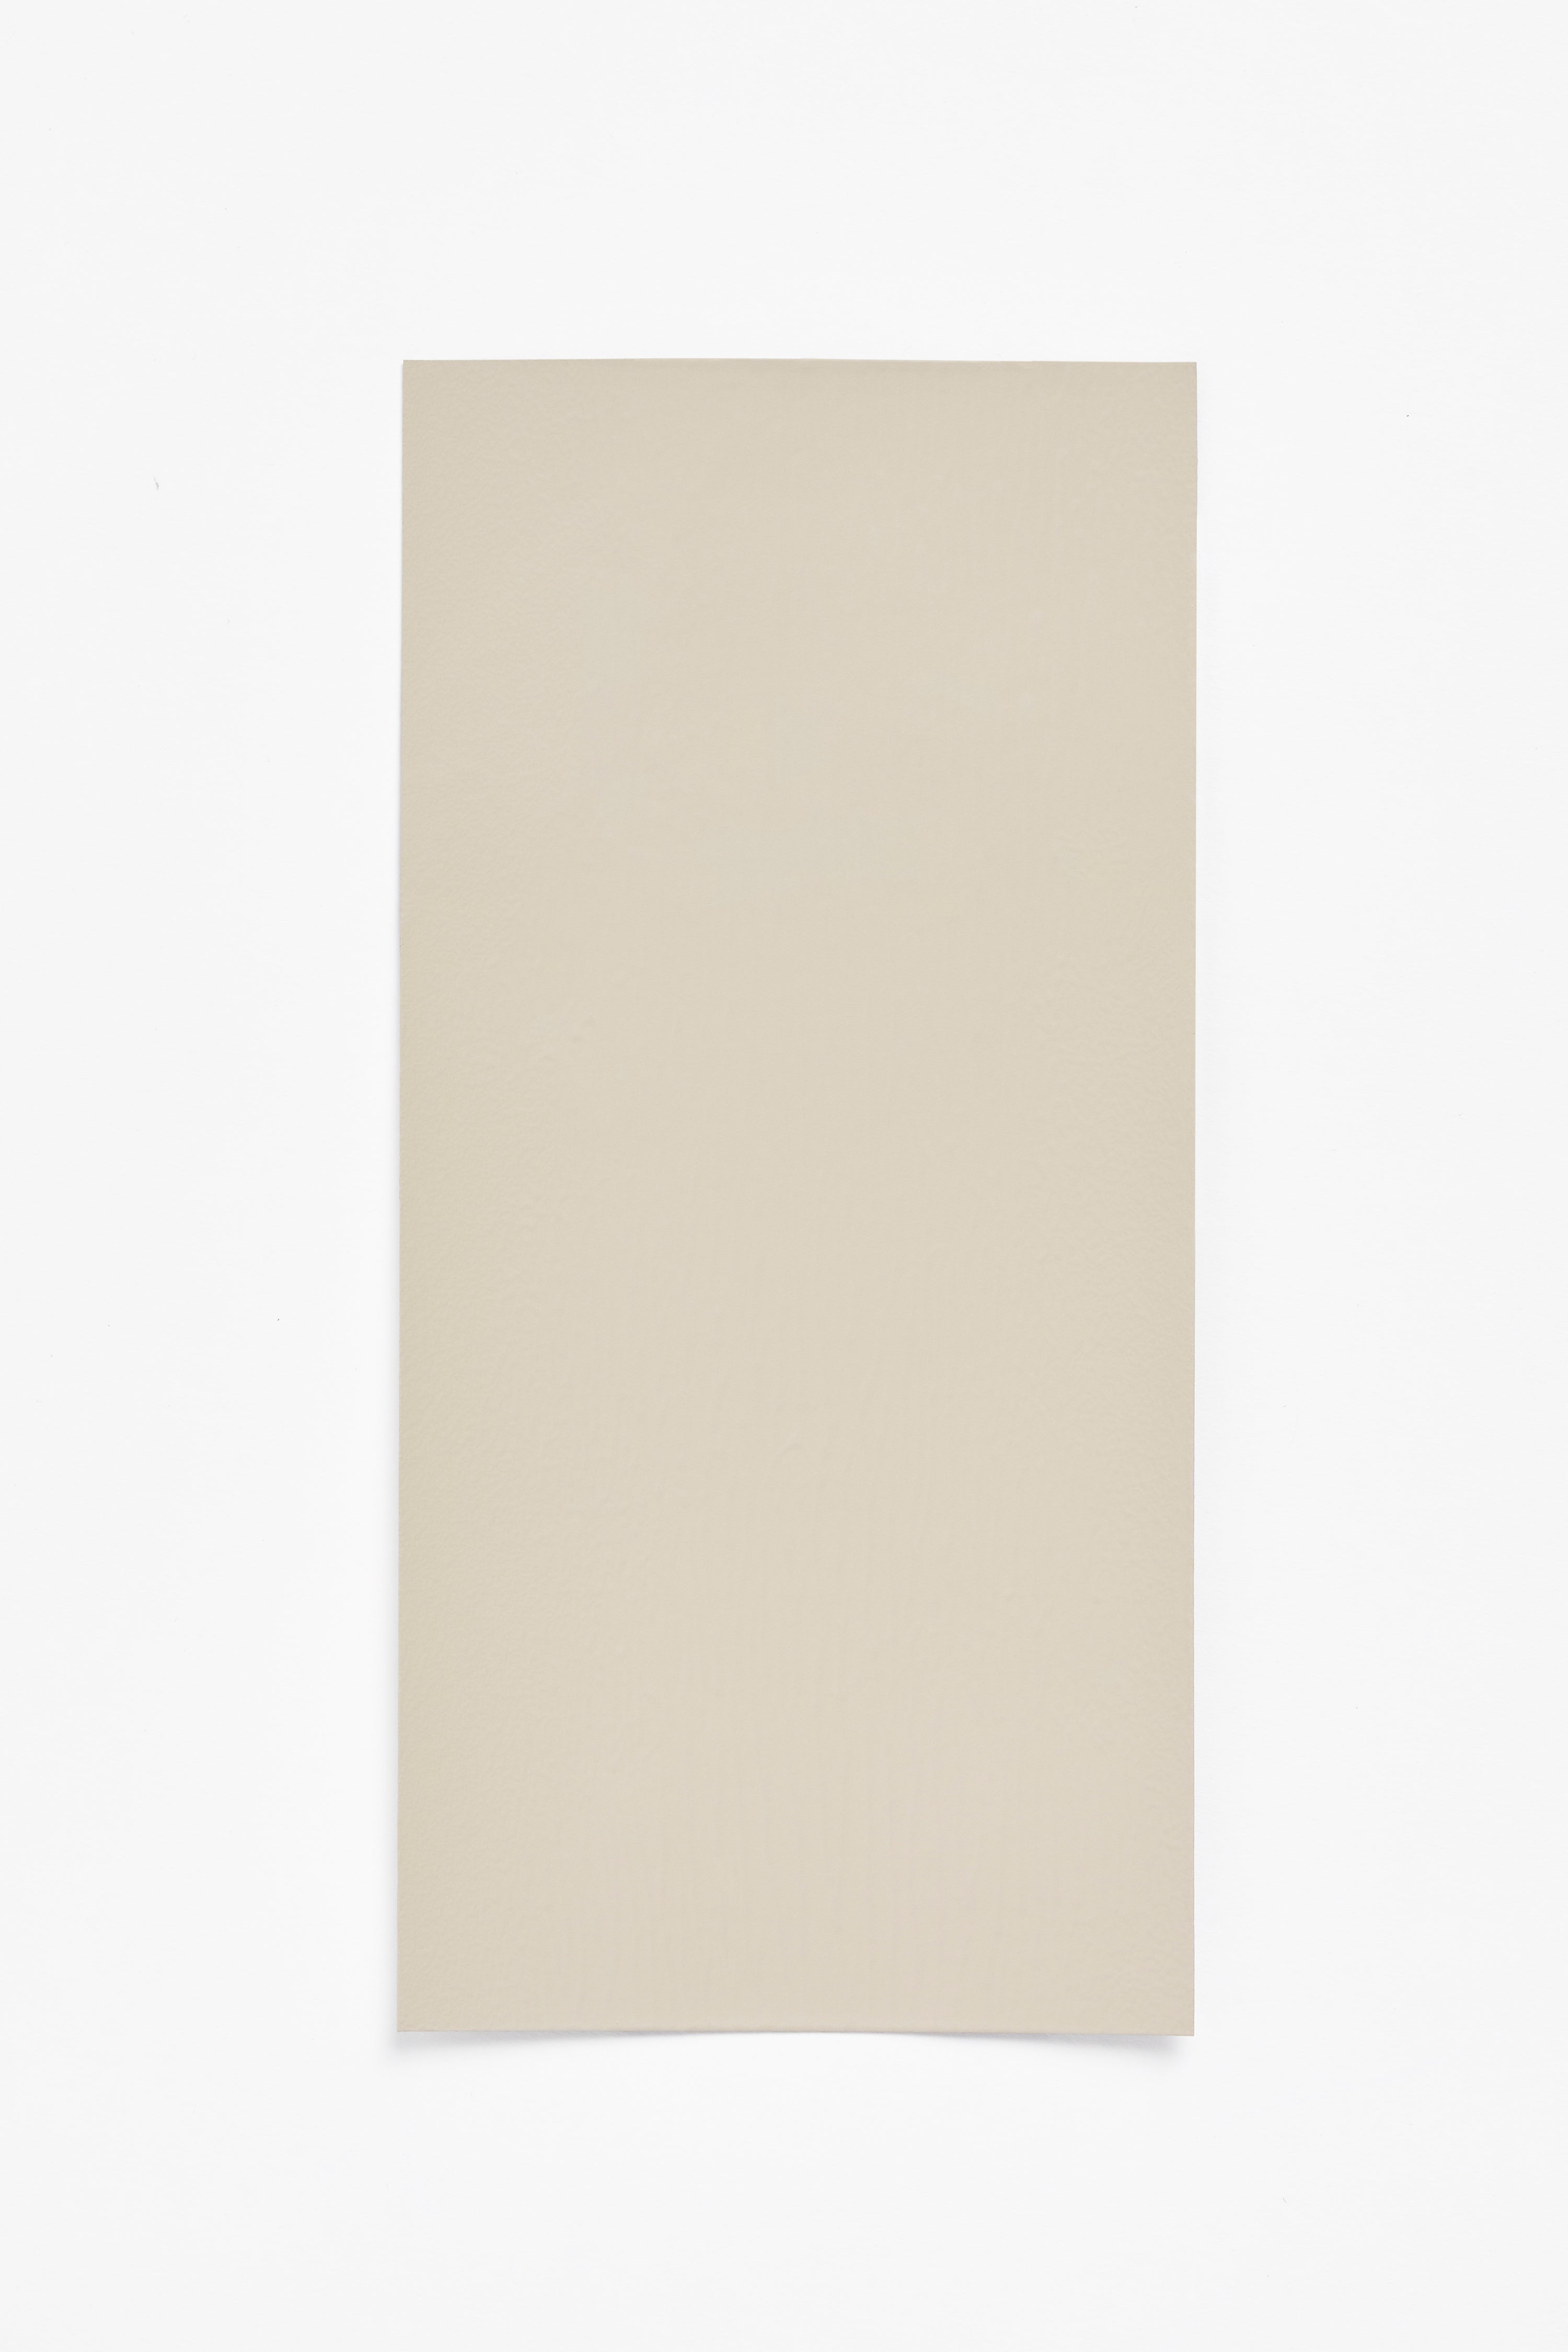 Limestone — a paint colour developed by Norm Architects for Blēo